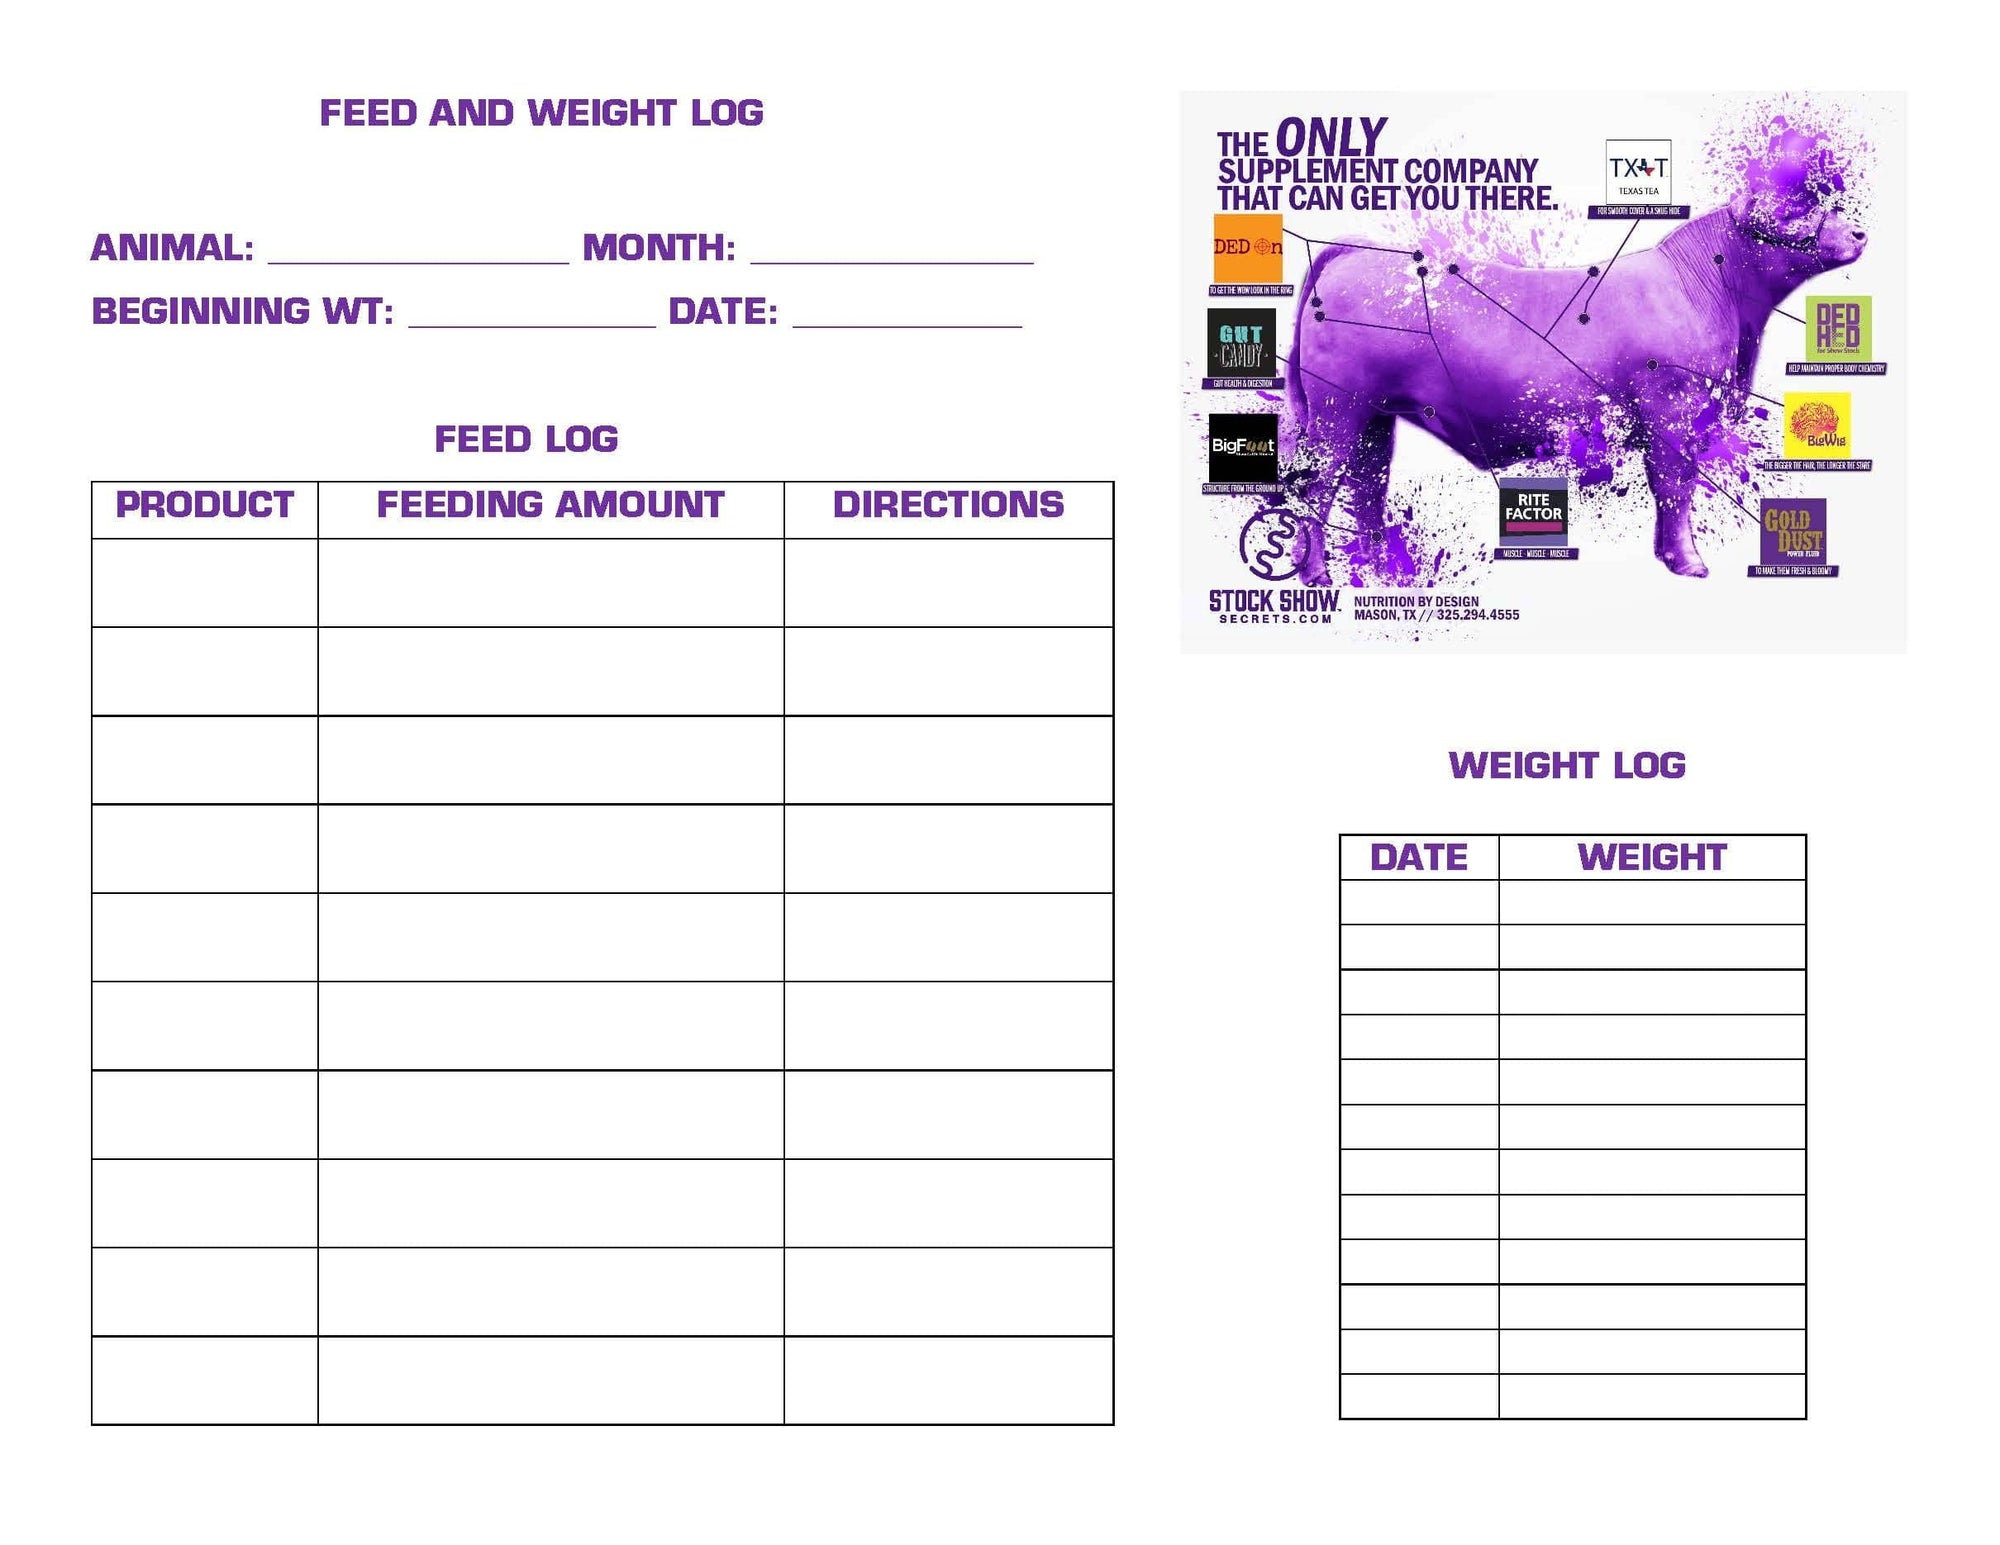 Feed and weight log